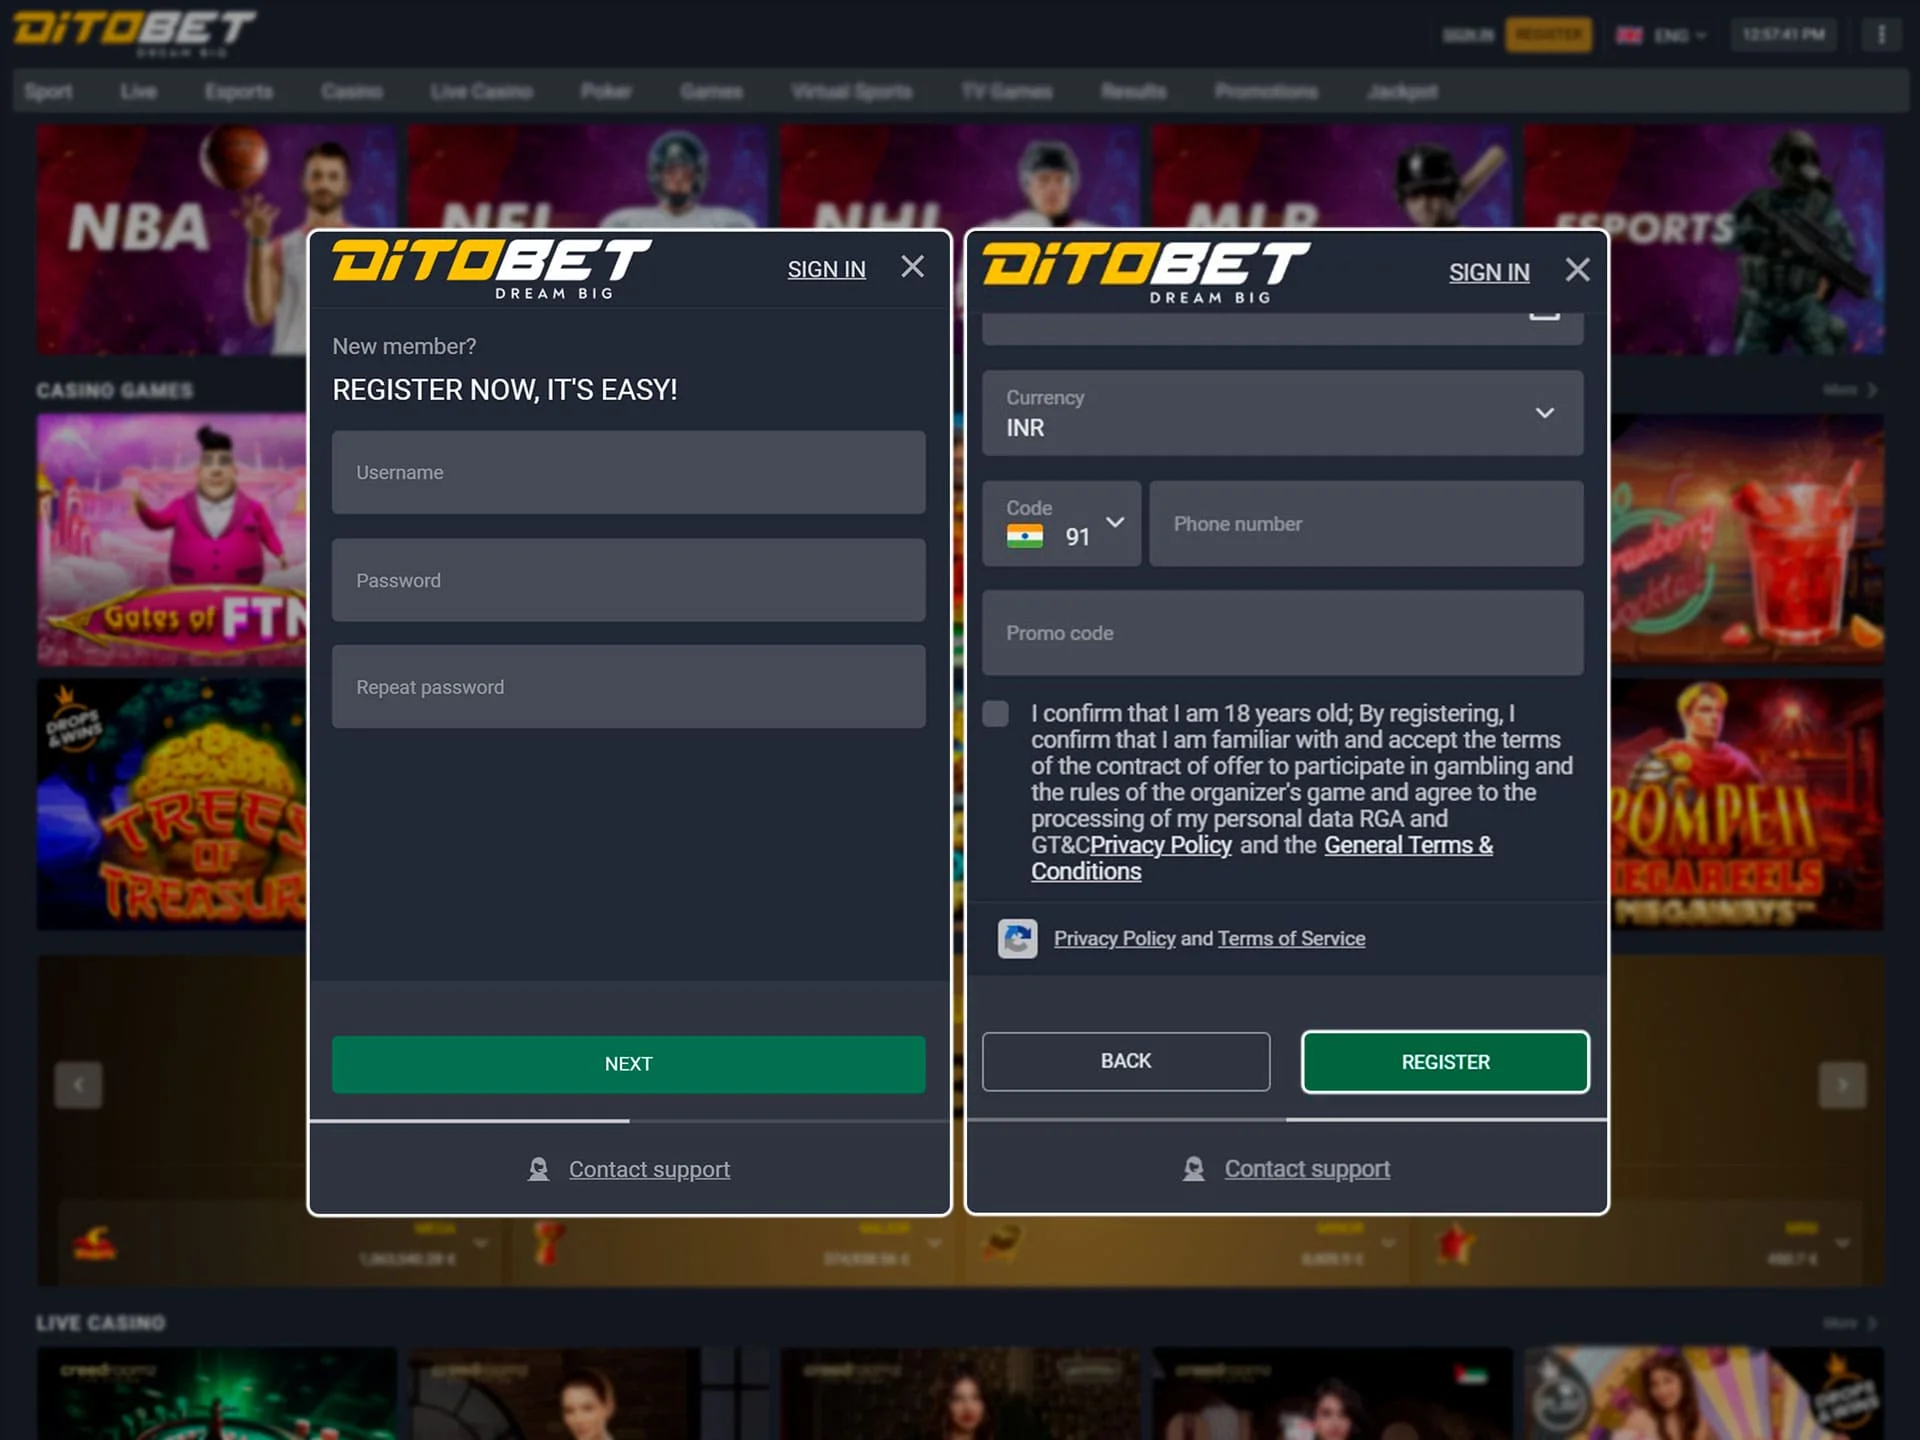 Use the direct link to join Ditobet.